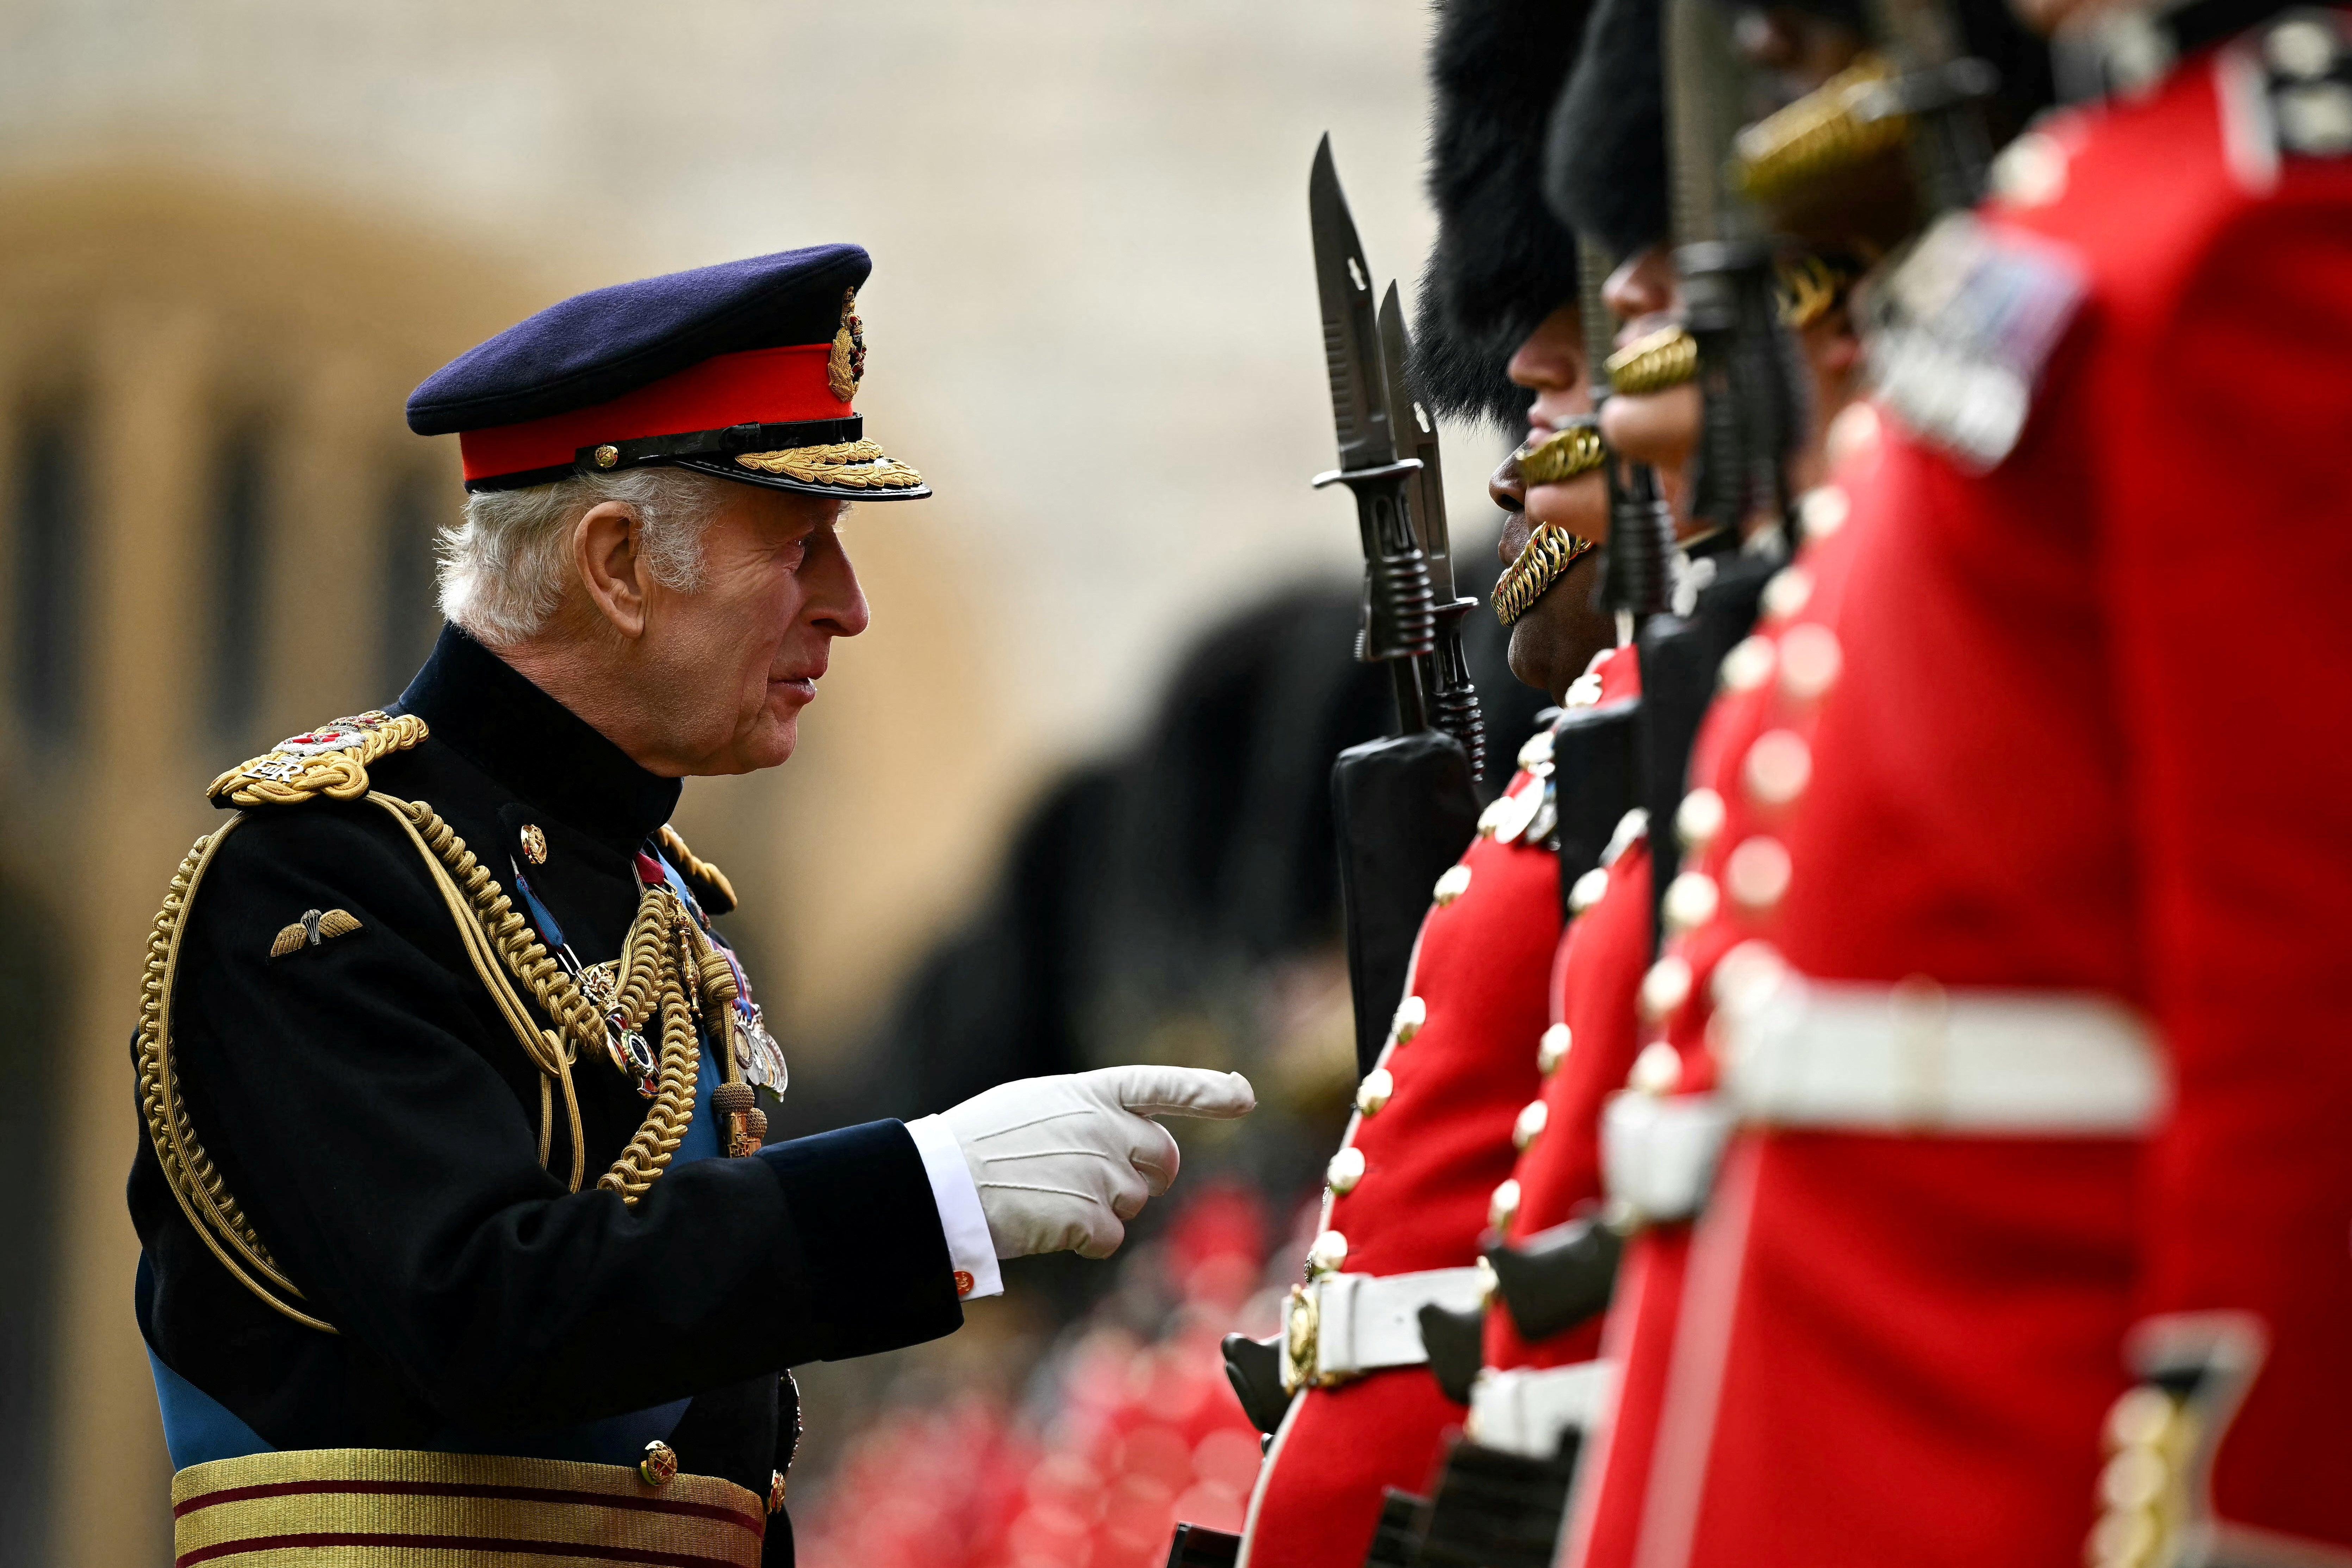 This will be Charles’s second Trooping the Colour as king.